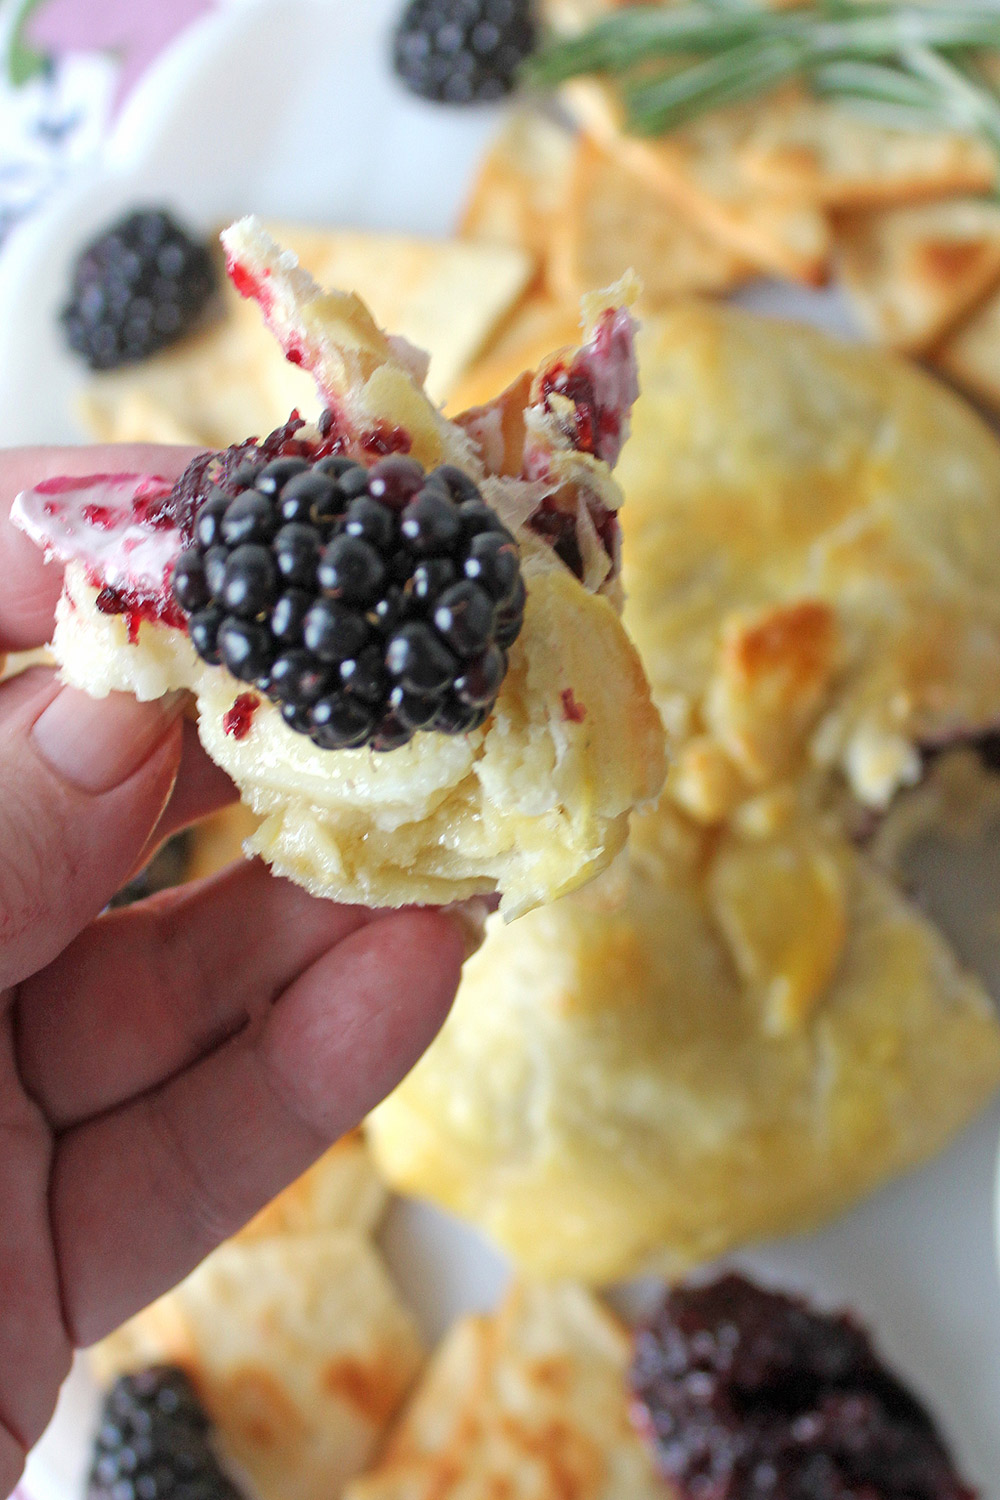 Hand holding chunk of baked brie with berries and jam.